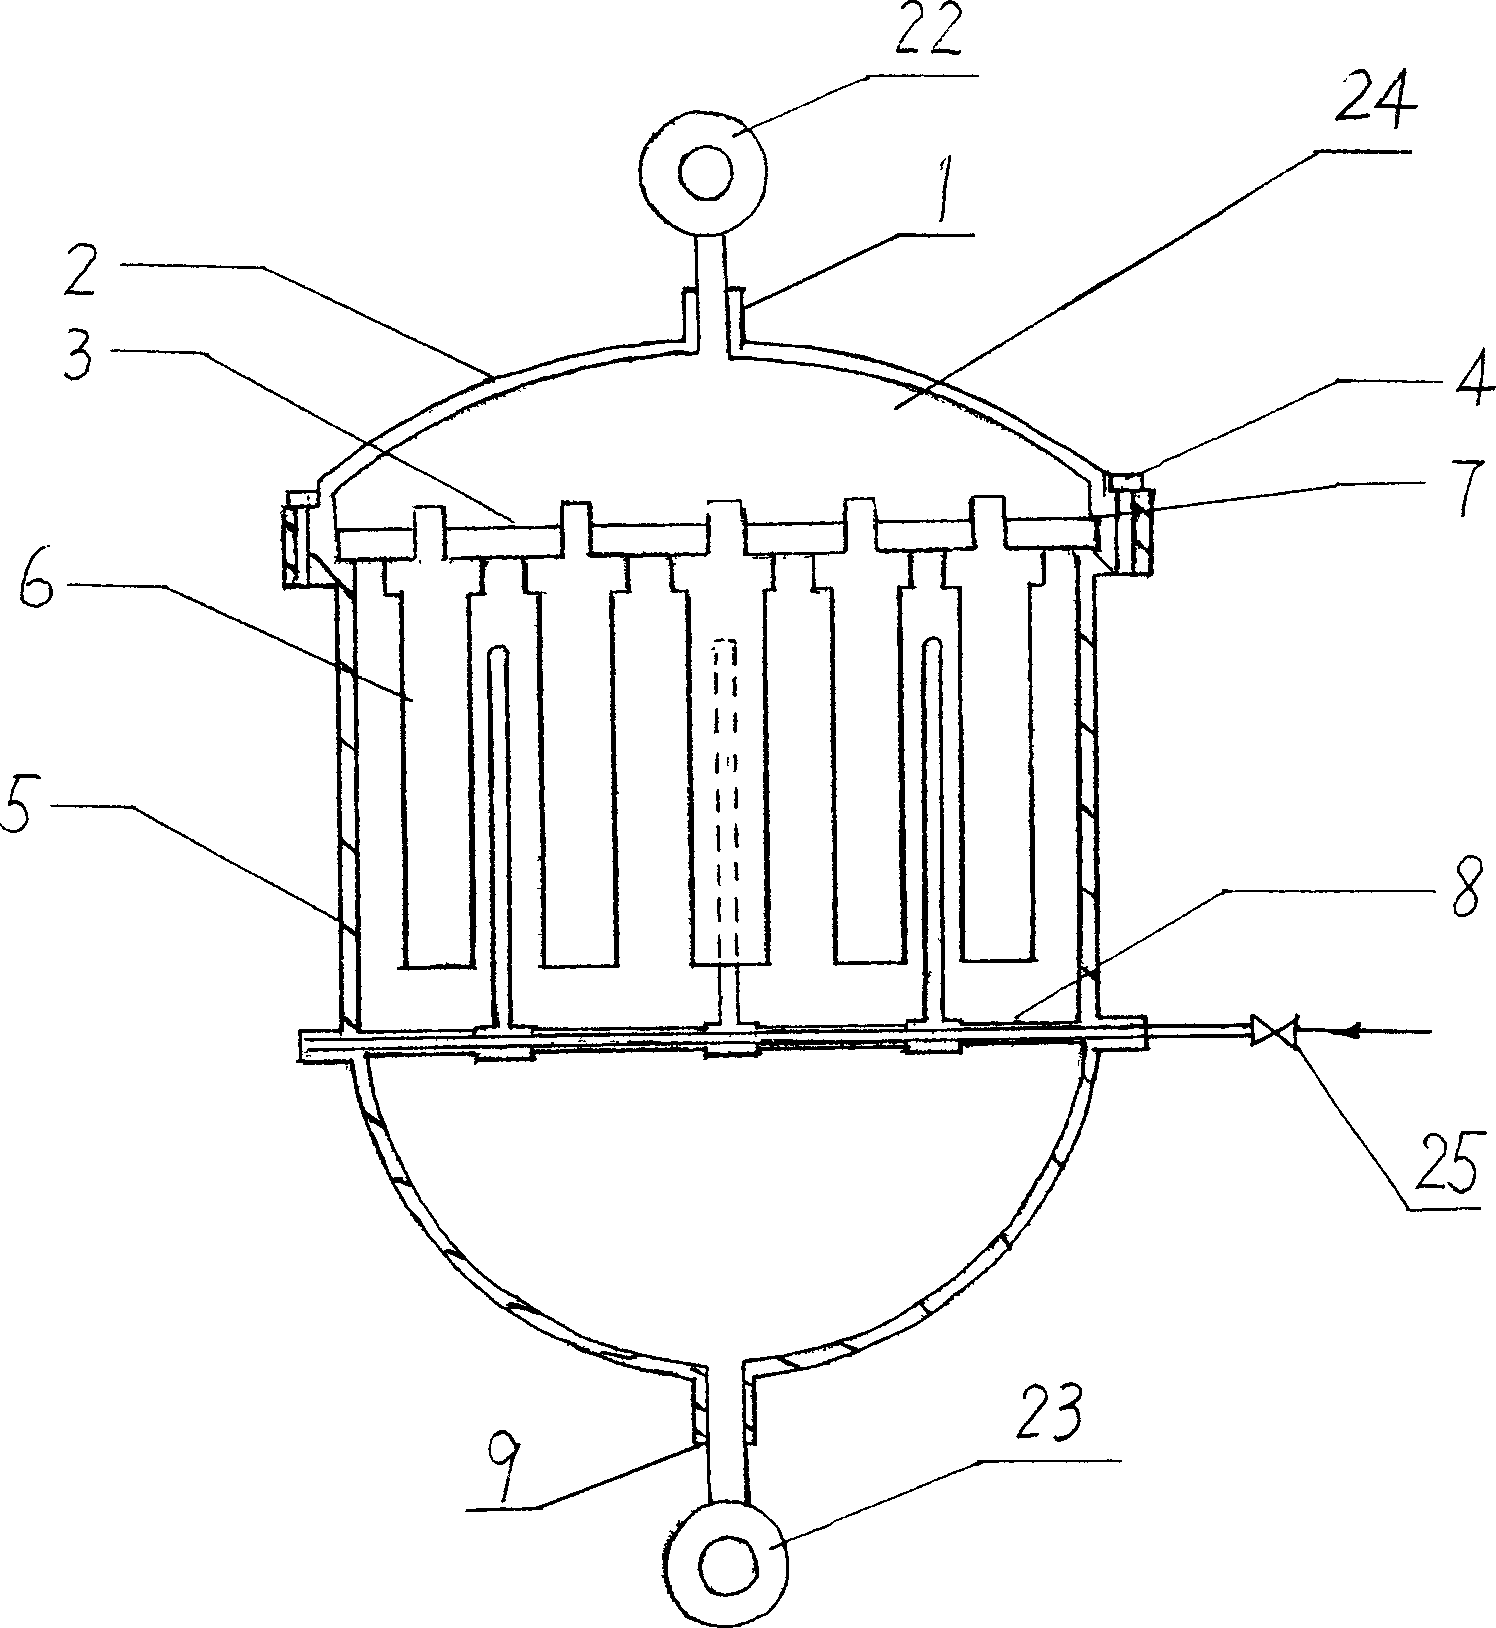 Fully-automatic middle-water deep purifying and regenerating water reuse apparatus and process